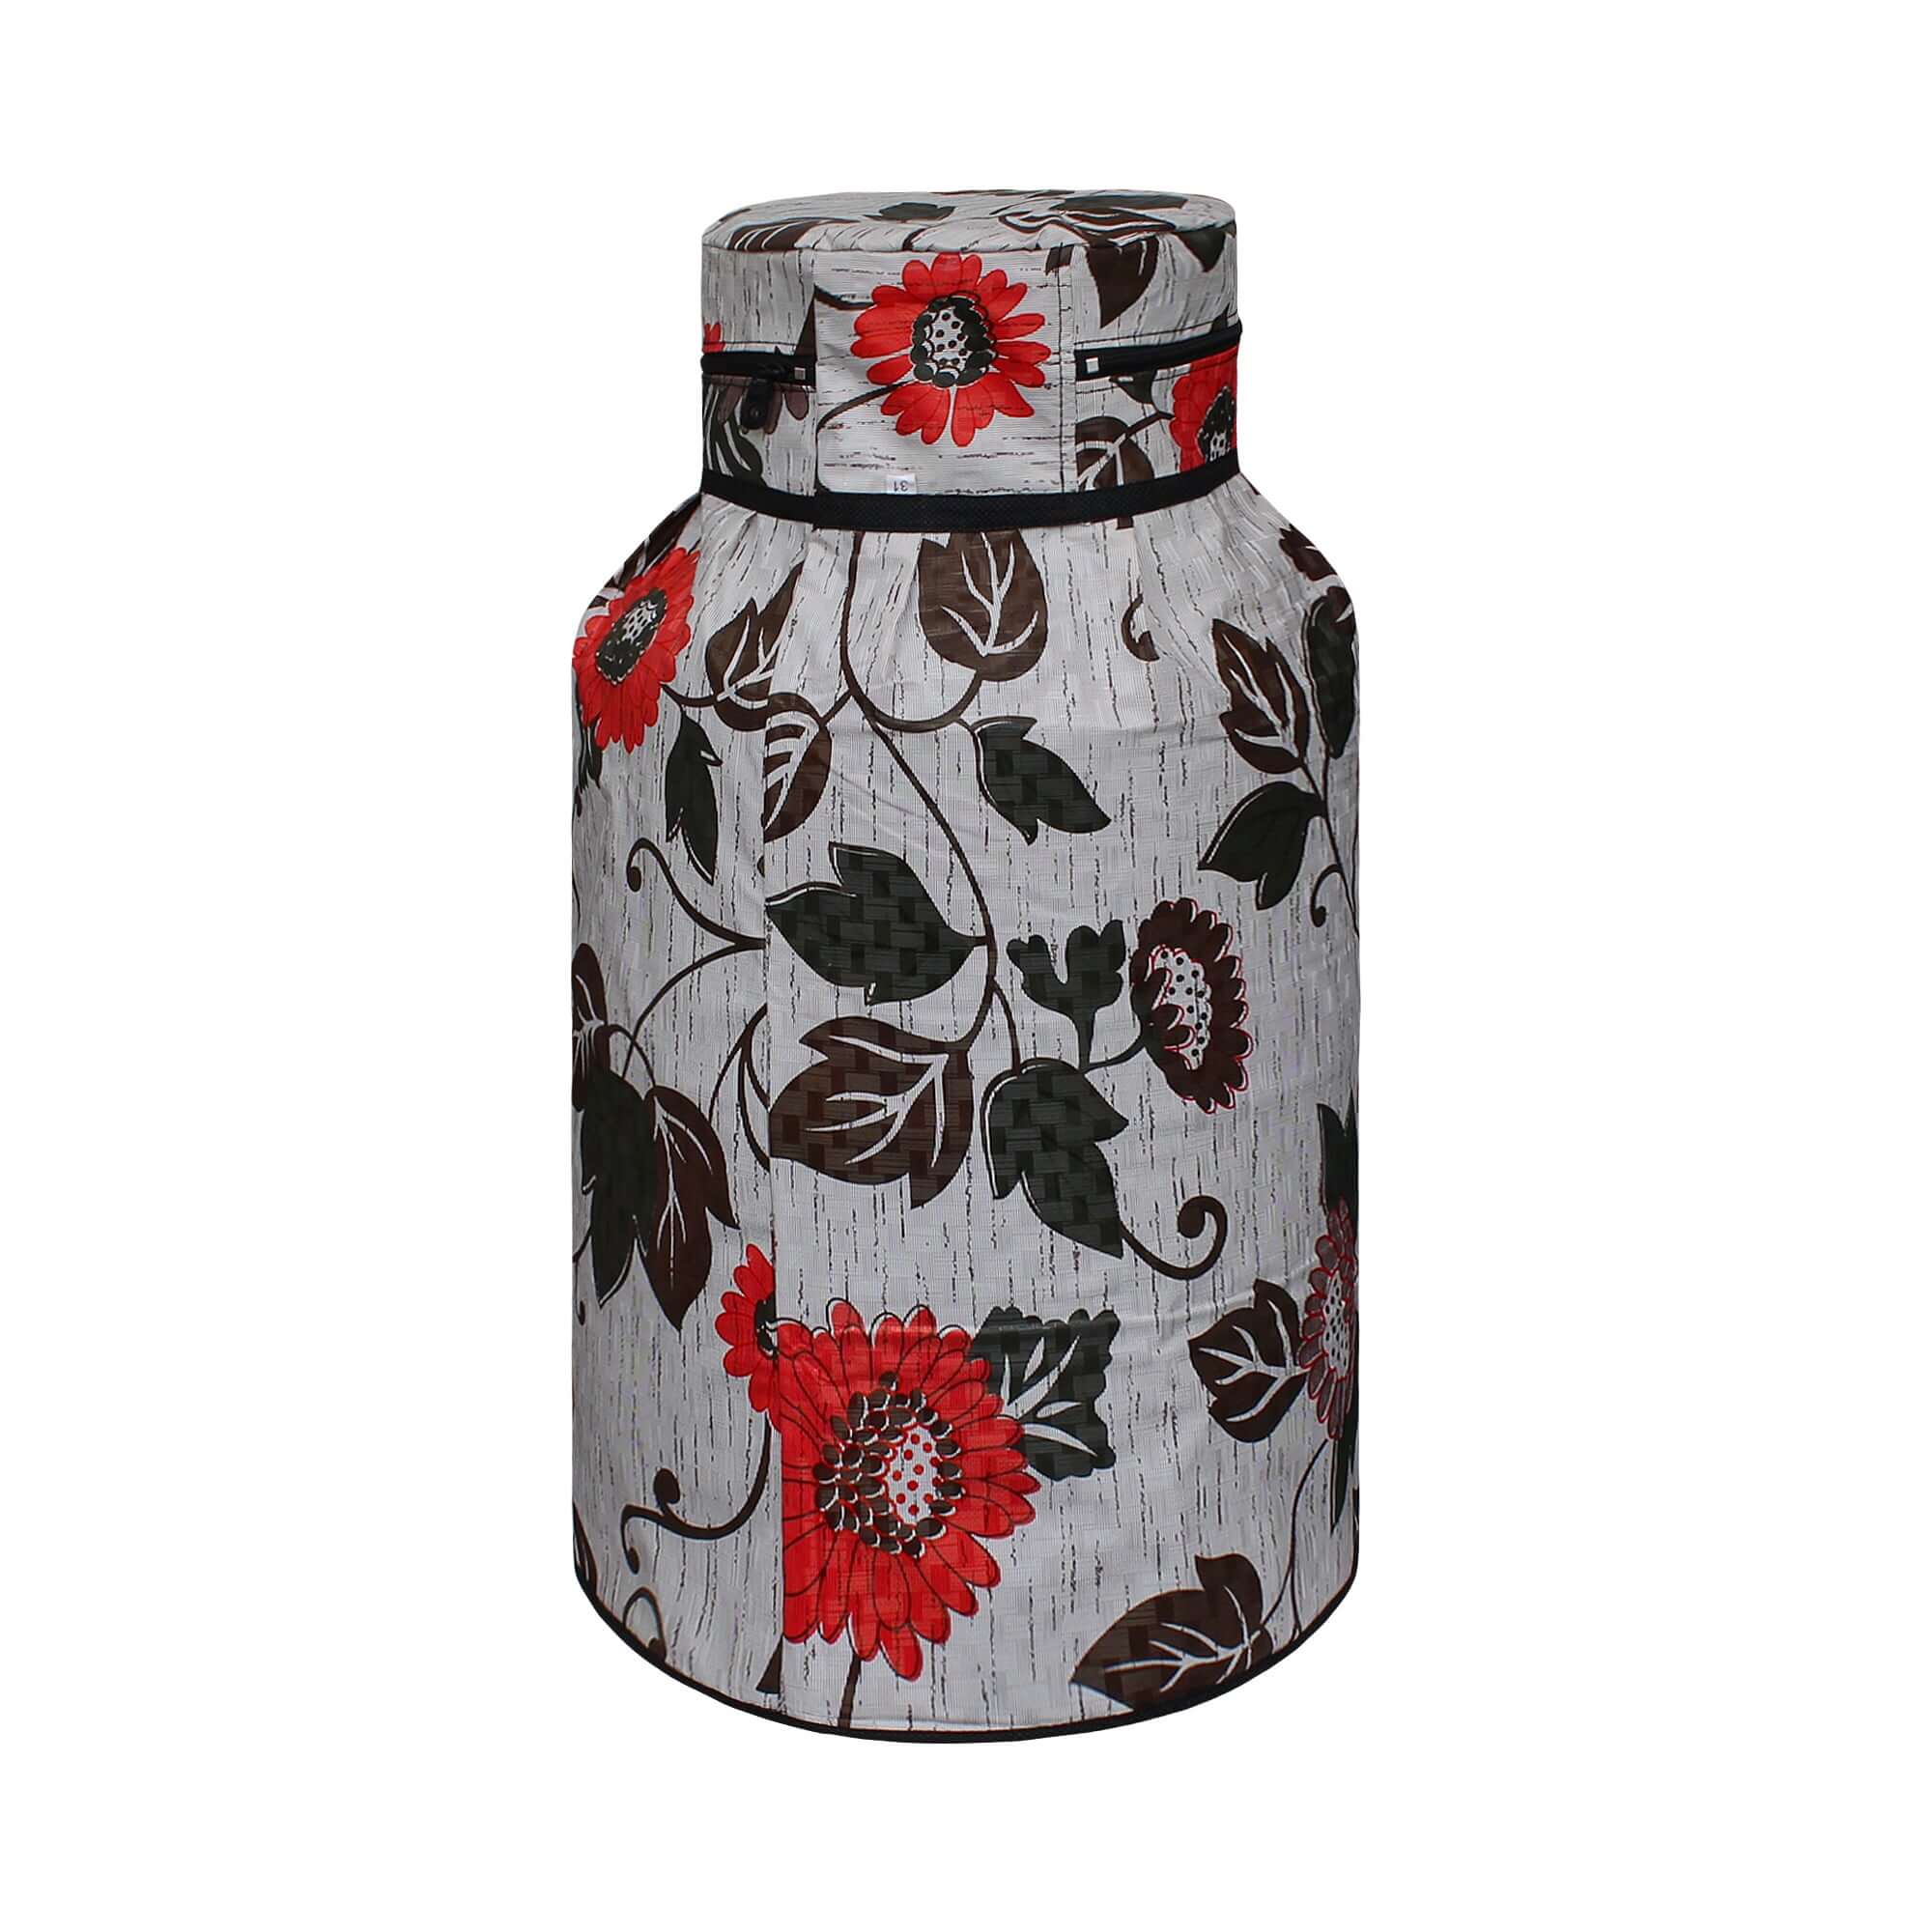 LPG Gas Cylinder Cover, SA21 - Dream Care Furnishings Private Limited